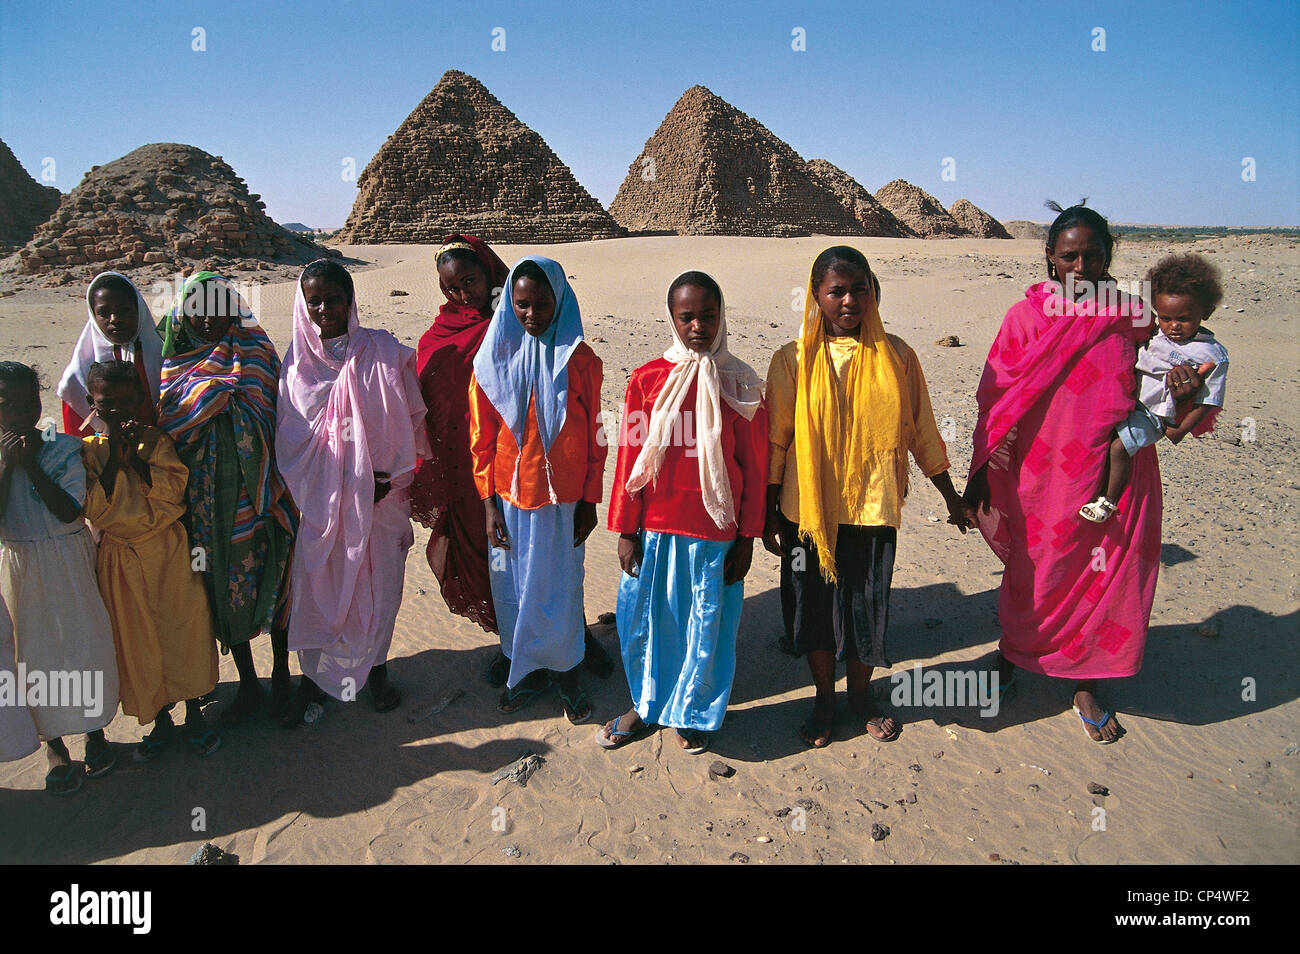 Sudan - Nubia - Nuri. Women with children, against the backdrop of the pyramids of the pharaohs blacks Stock Photo